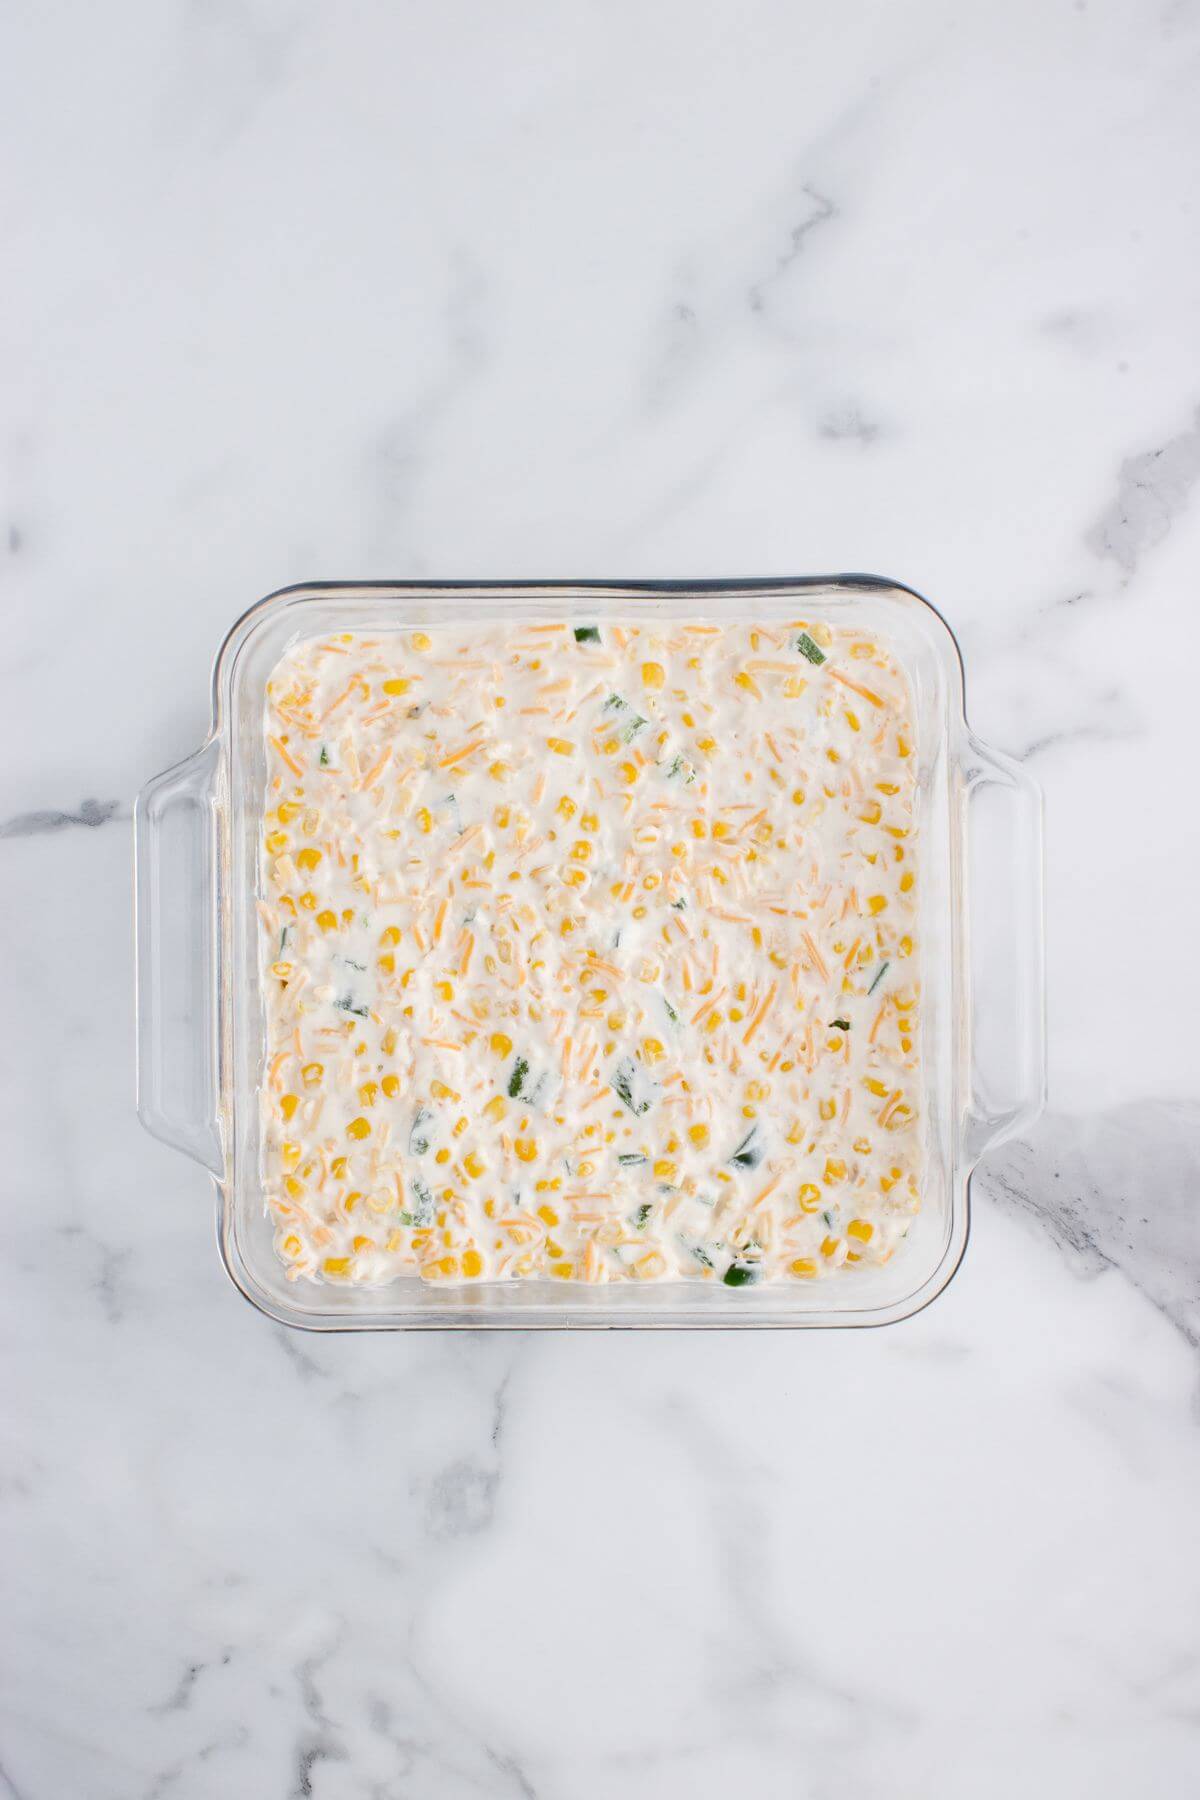 A glass square pan is filled with white creamy casserole mixture showing corn kernels.